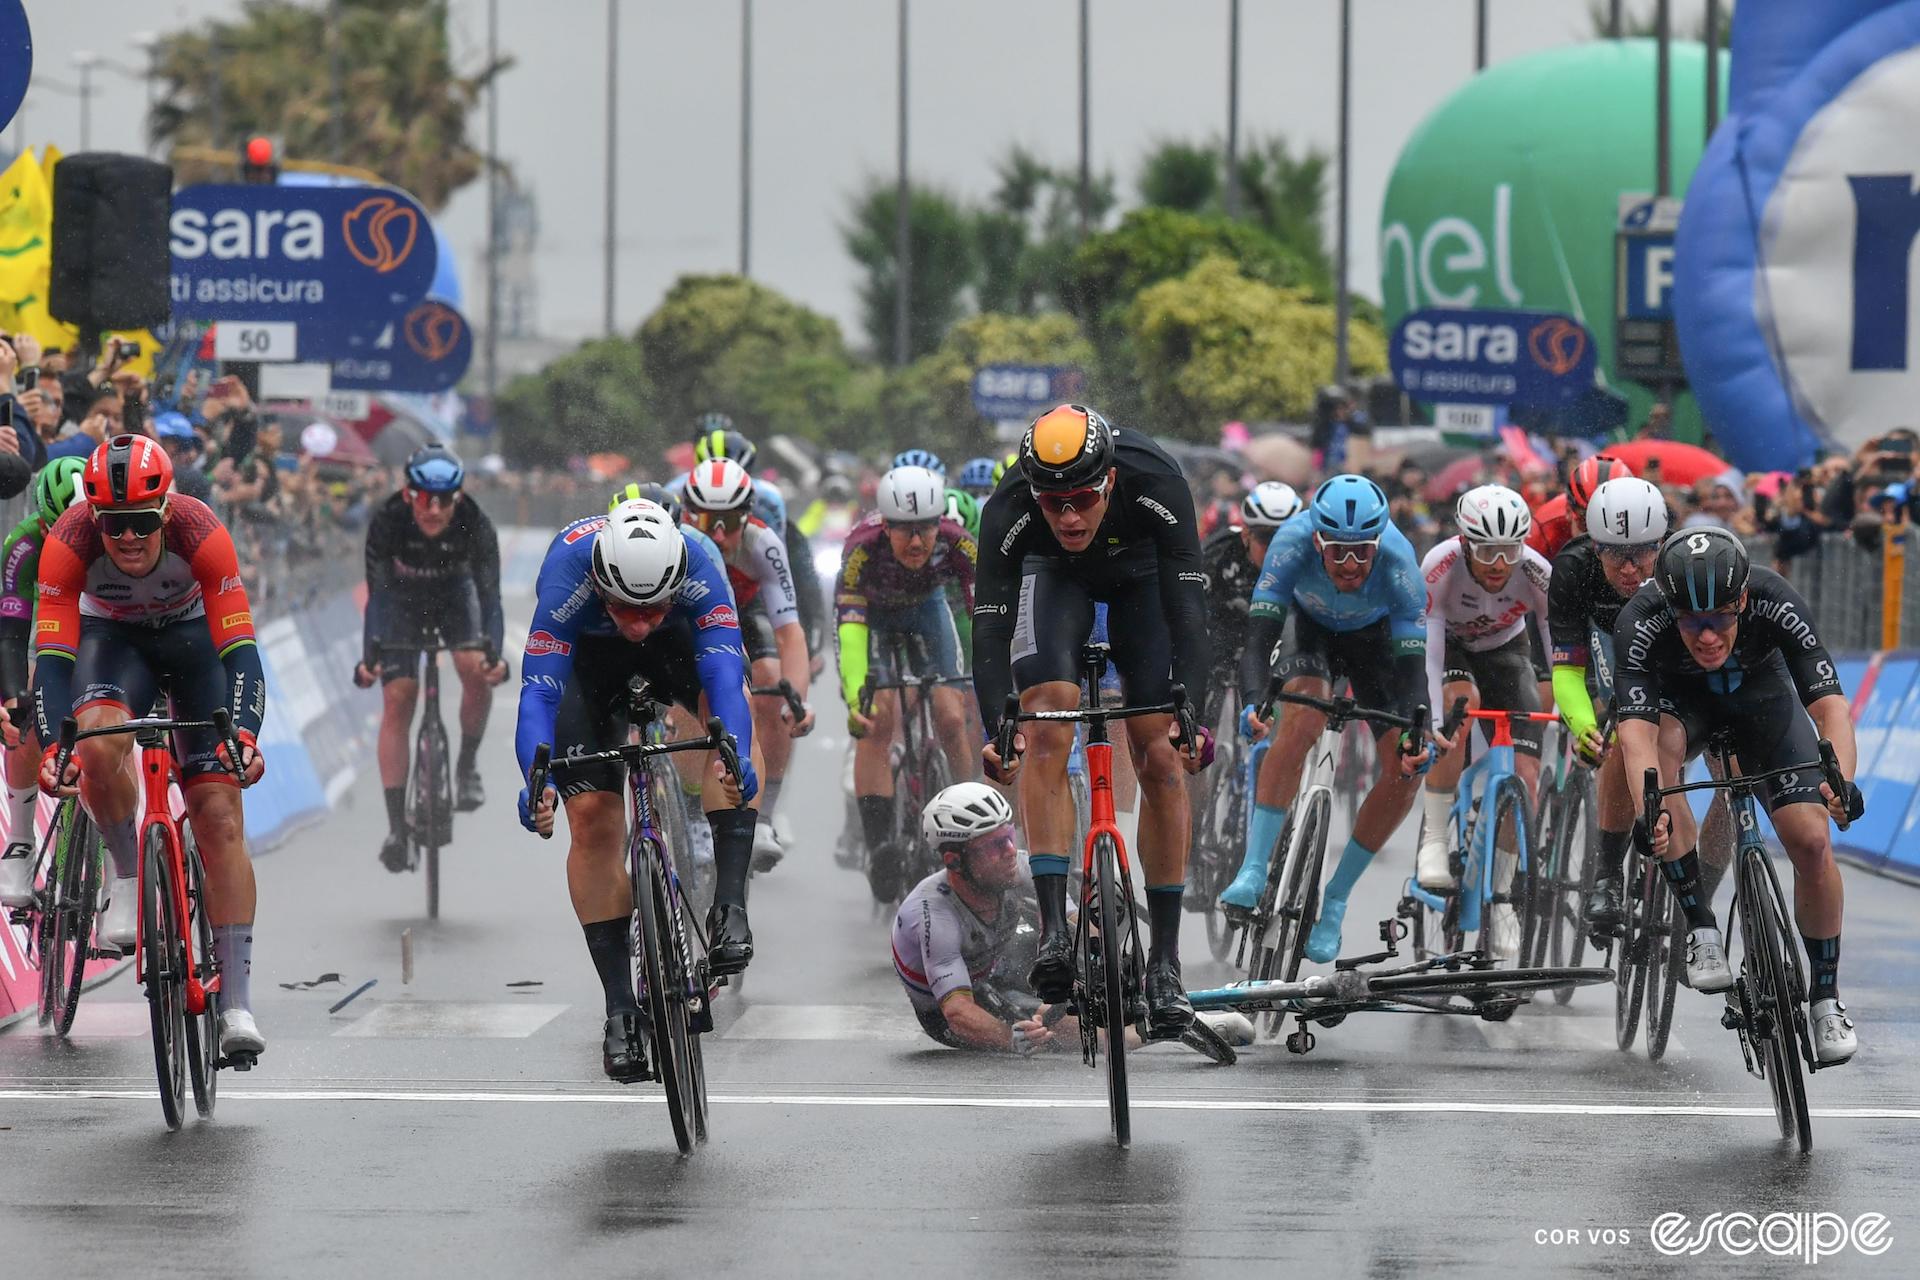 A bunch of pro cyclists sprint for the finish line on a wet road. One of the riders, Mark Cavendish, is hitting ground at the moment the image was taken, his bike lying beside him on the ground.